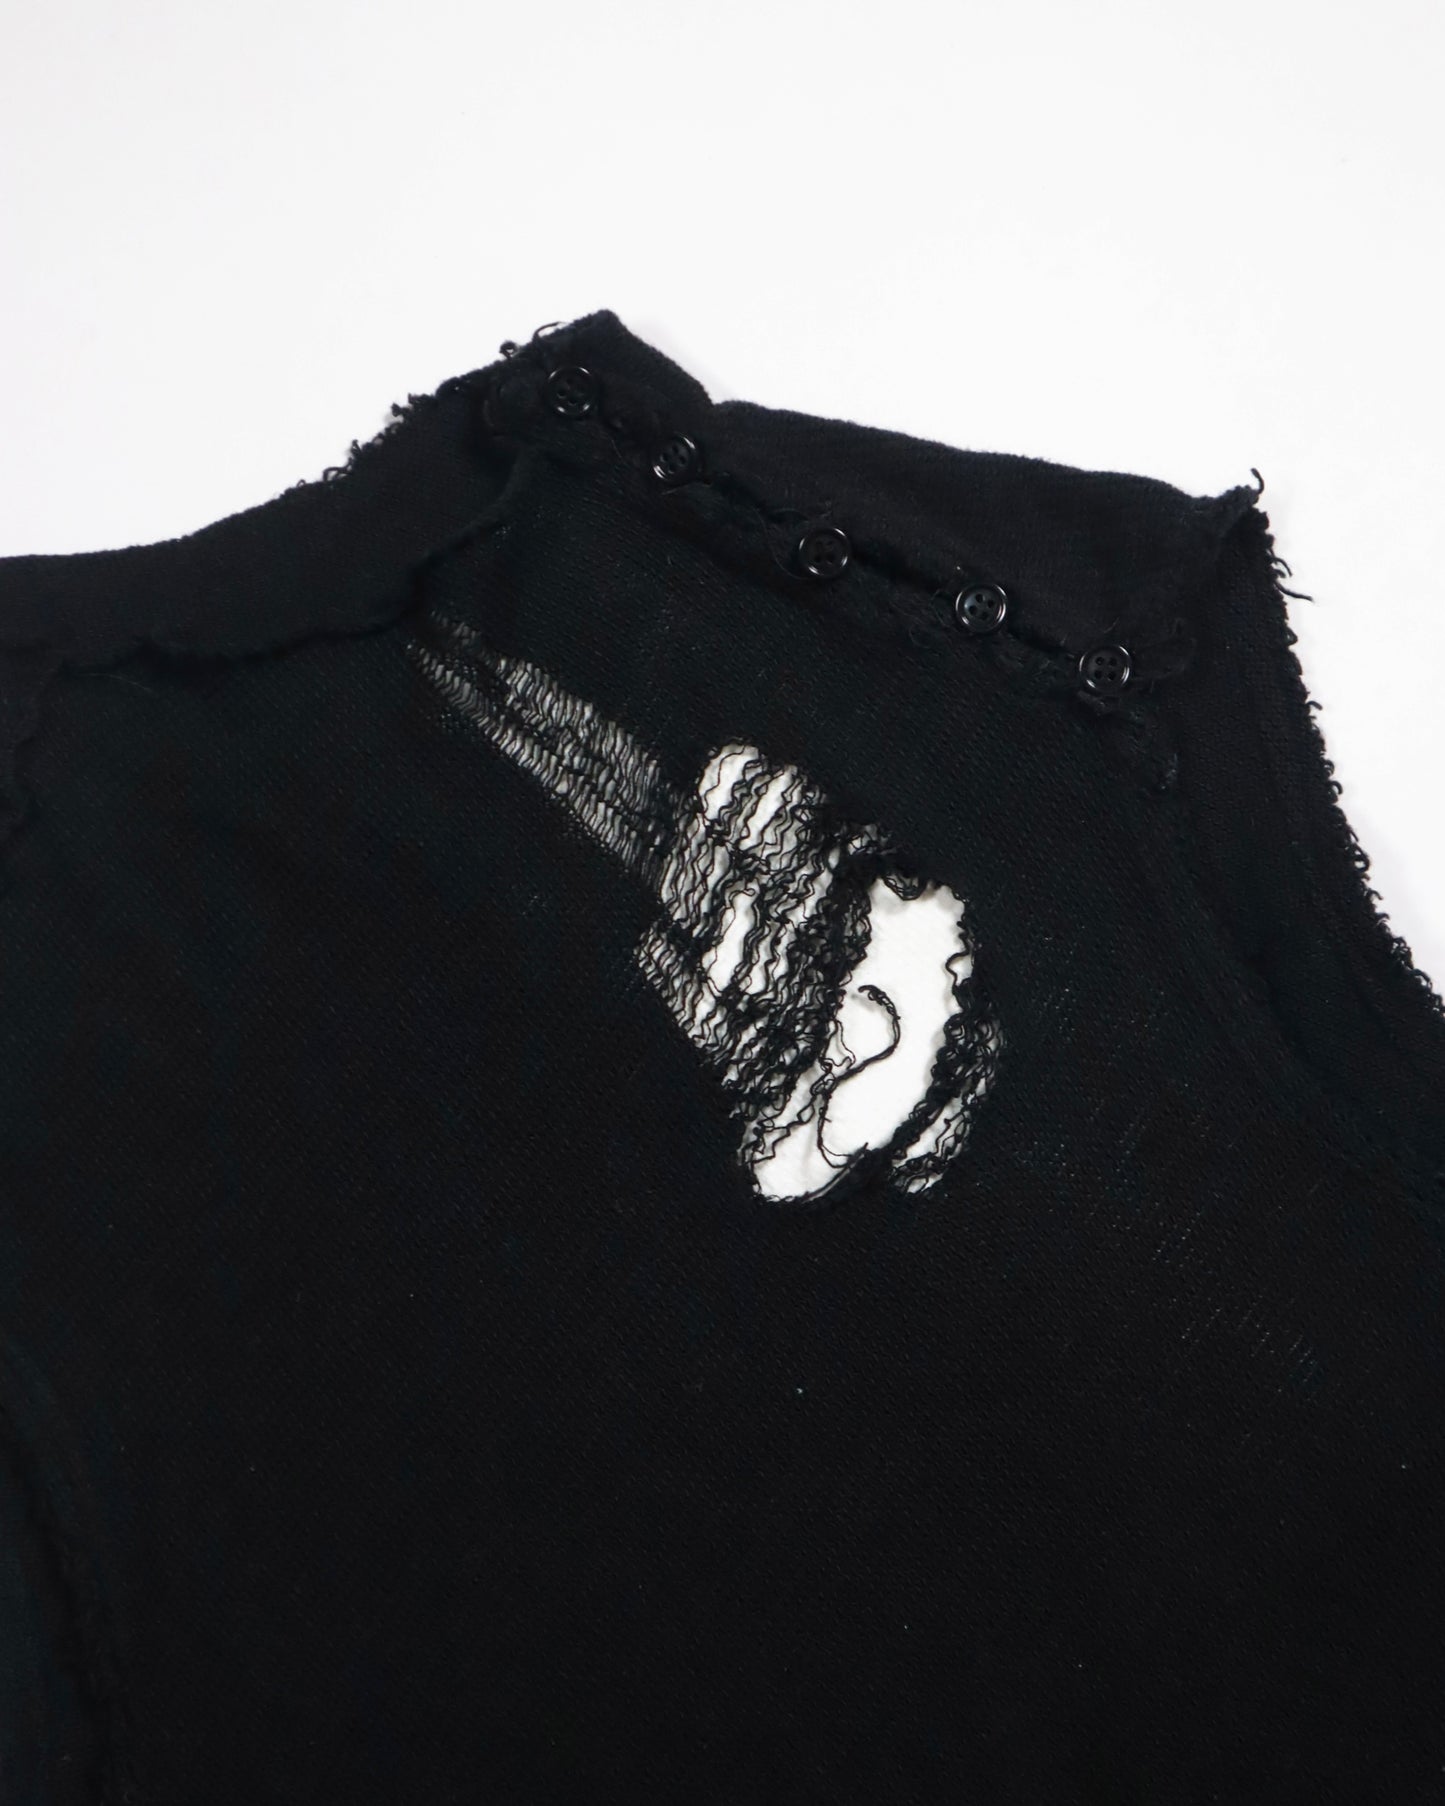 Alice Auaa S/S 2002 Distressed Knit Top